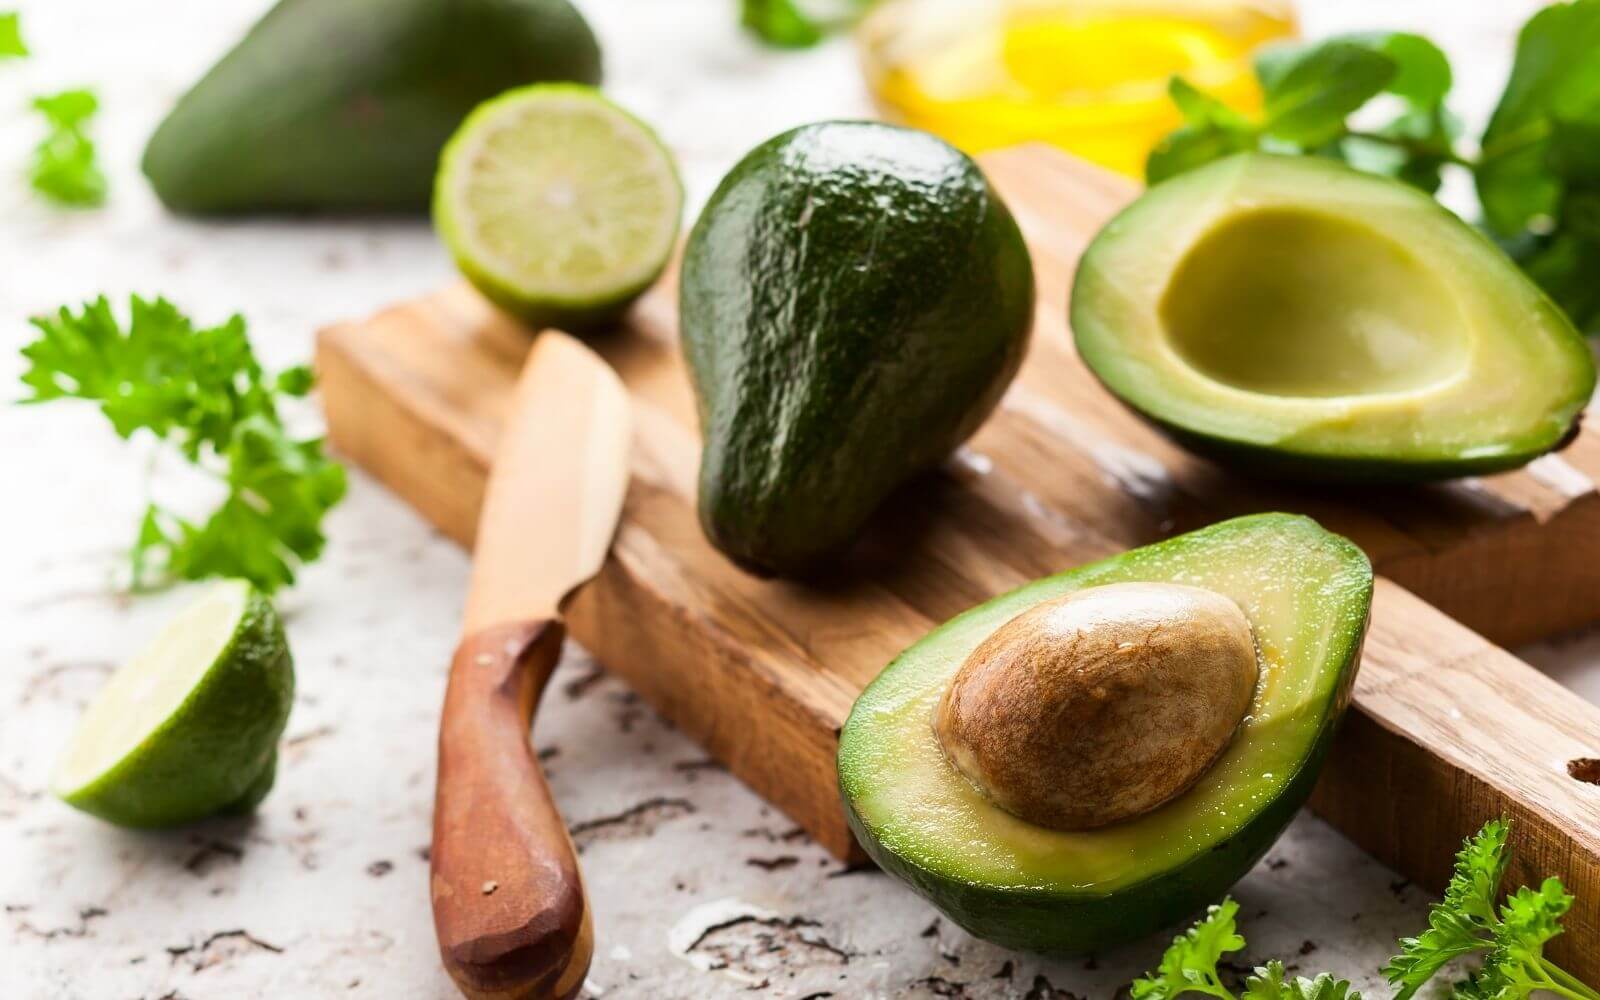 The Benefits of Avocados